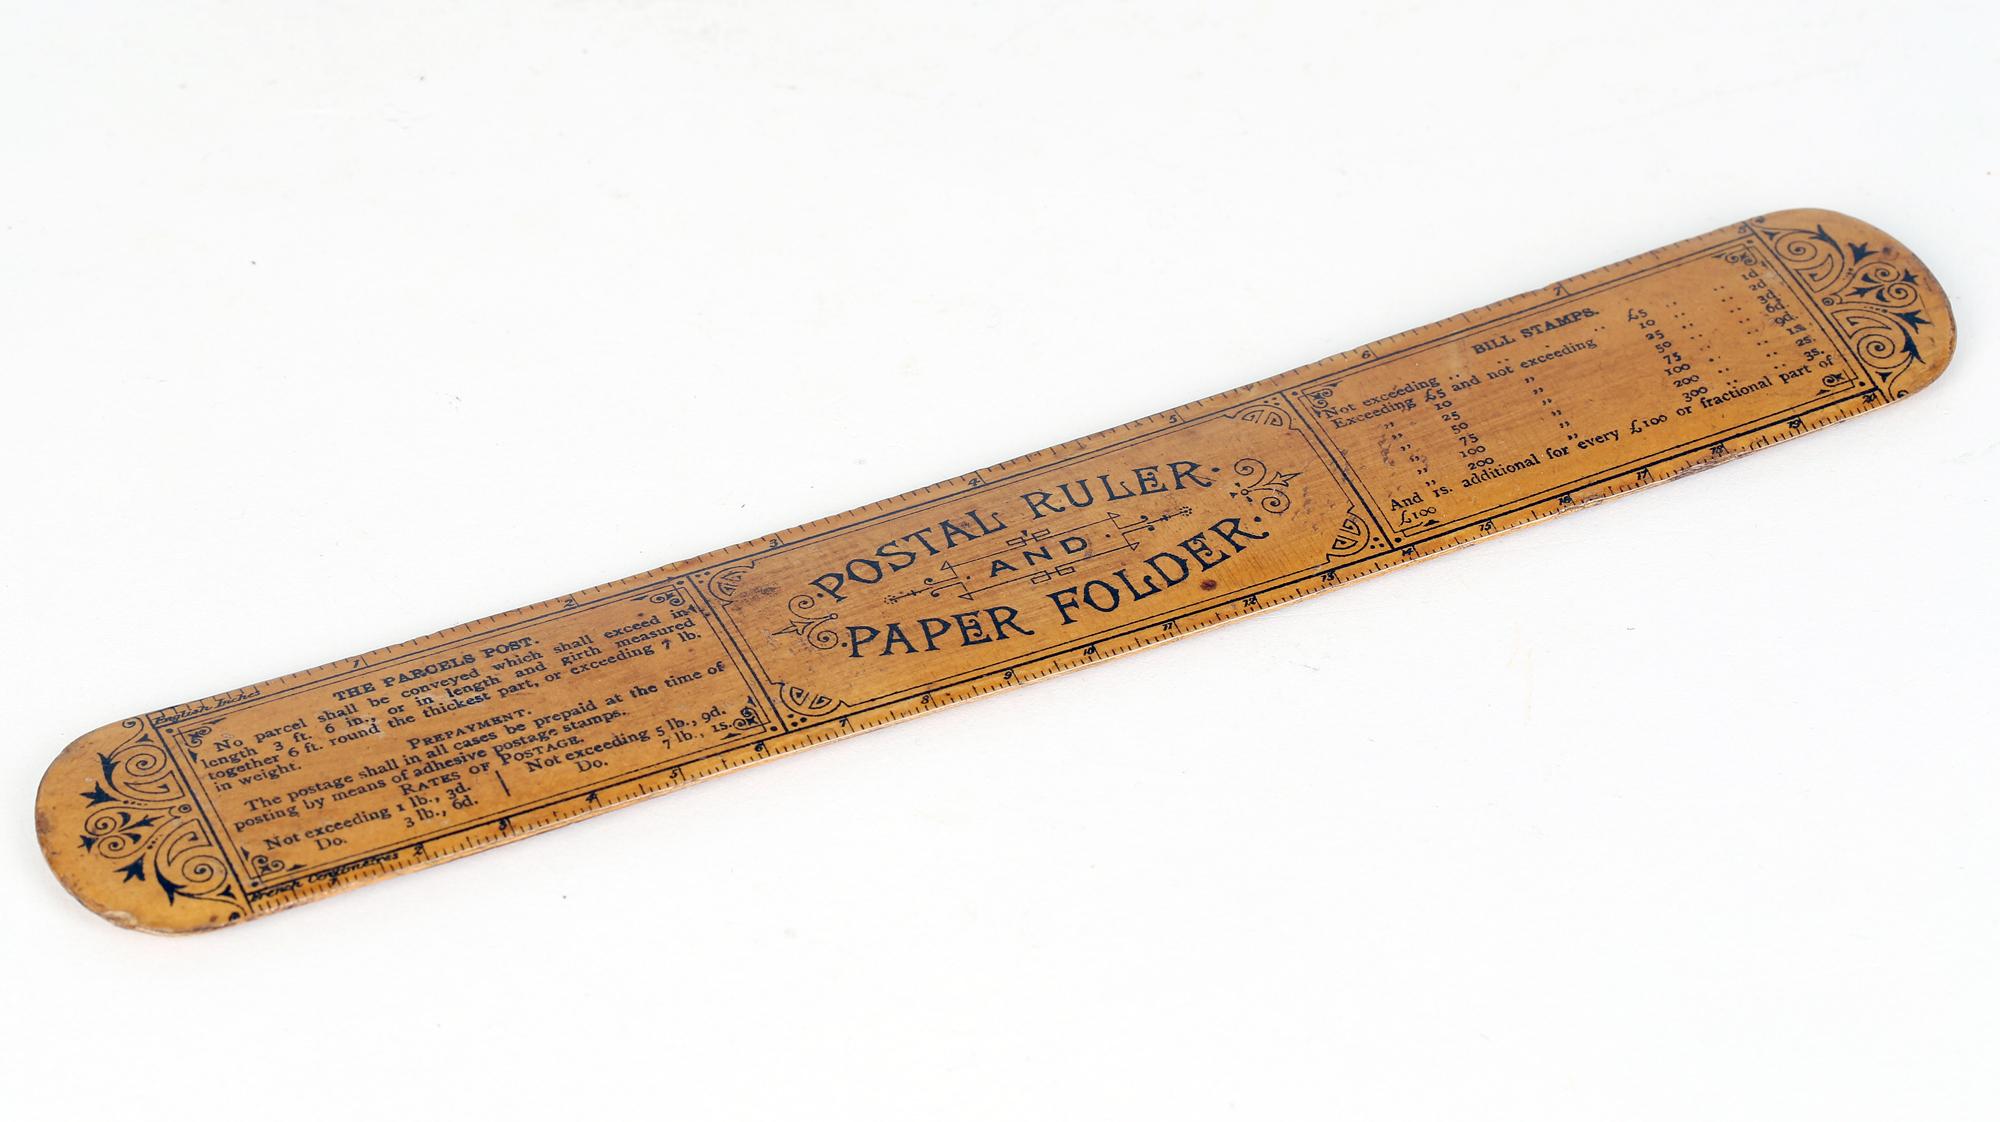 Carved Mauchline Wooden Postal Ruler and Paper Folder with Beach & Cliffs, Cromer For Sale